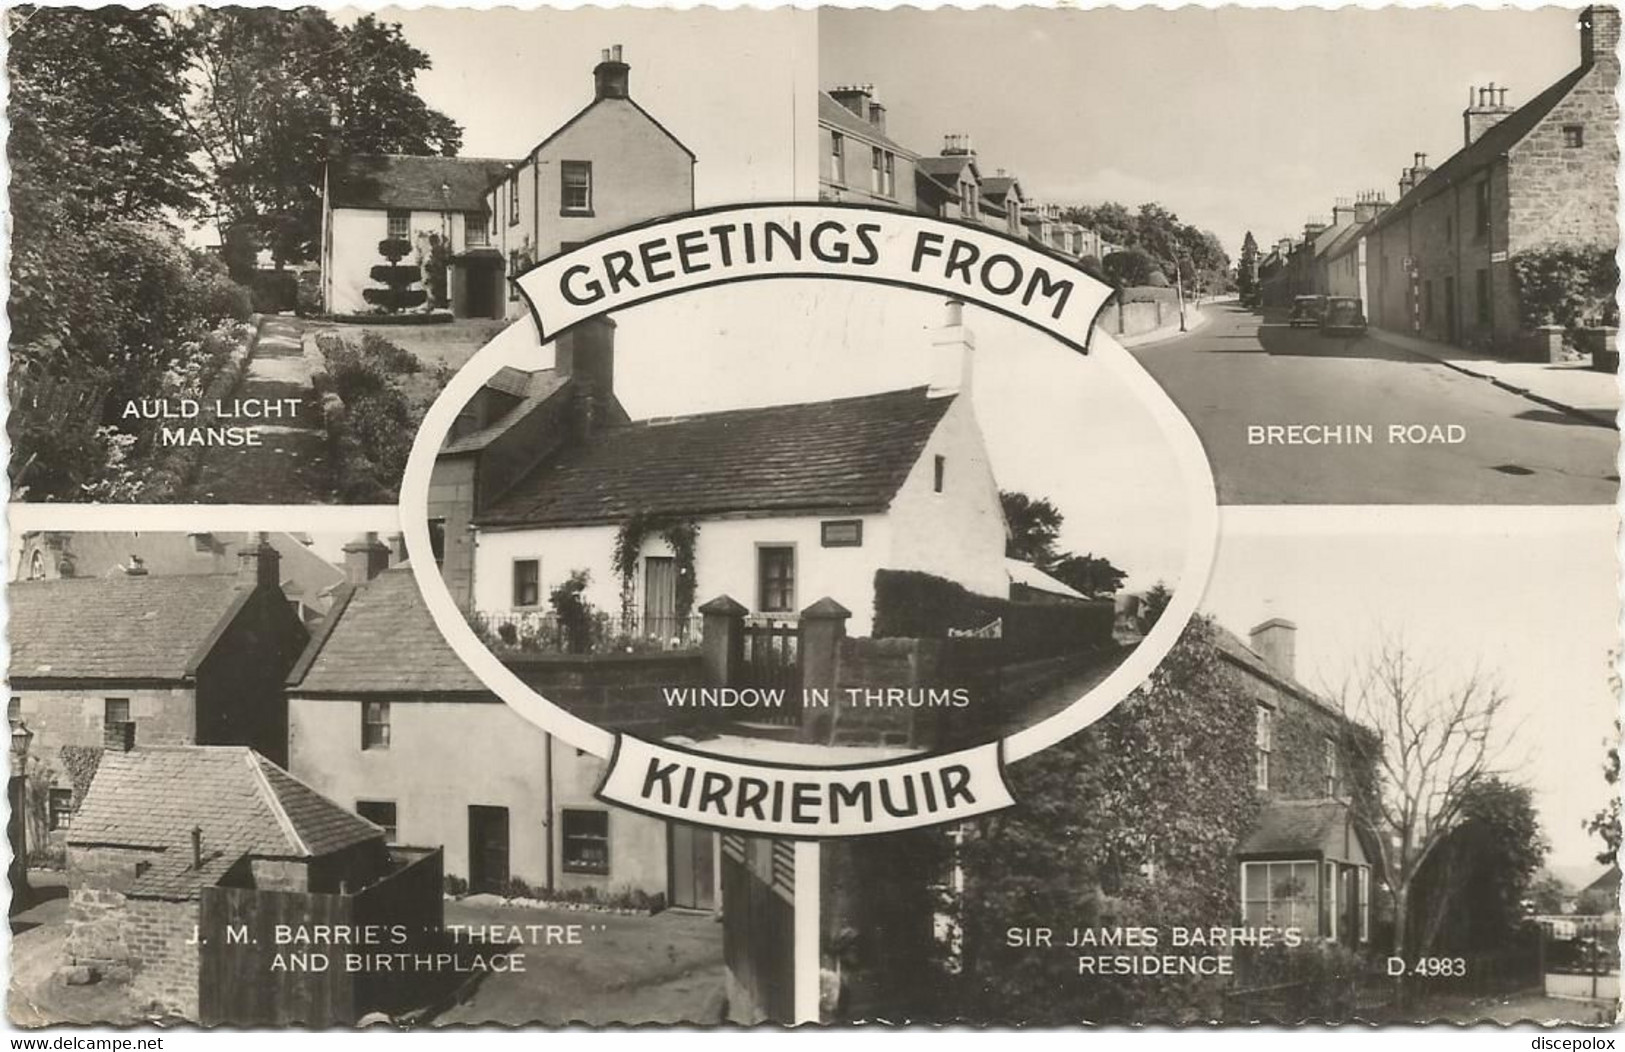 AC4504 Greetings From Kirriemuir - Auld Licht Manse - Brechin Road - JM Barrie's Theatre And Birthplace / Viaggiata 1960 - Angus